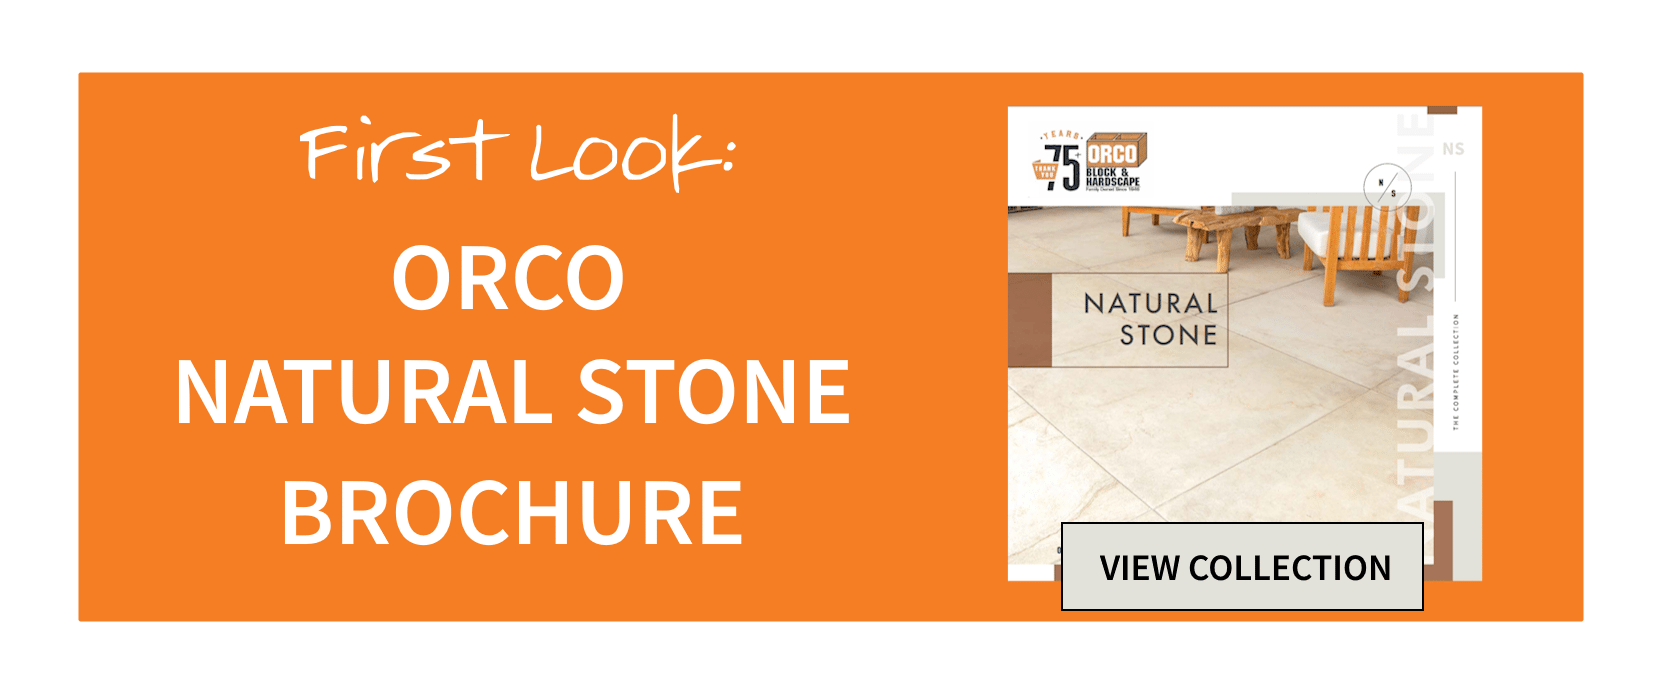 First Look - ORCO Natural Stone Brochure